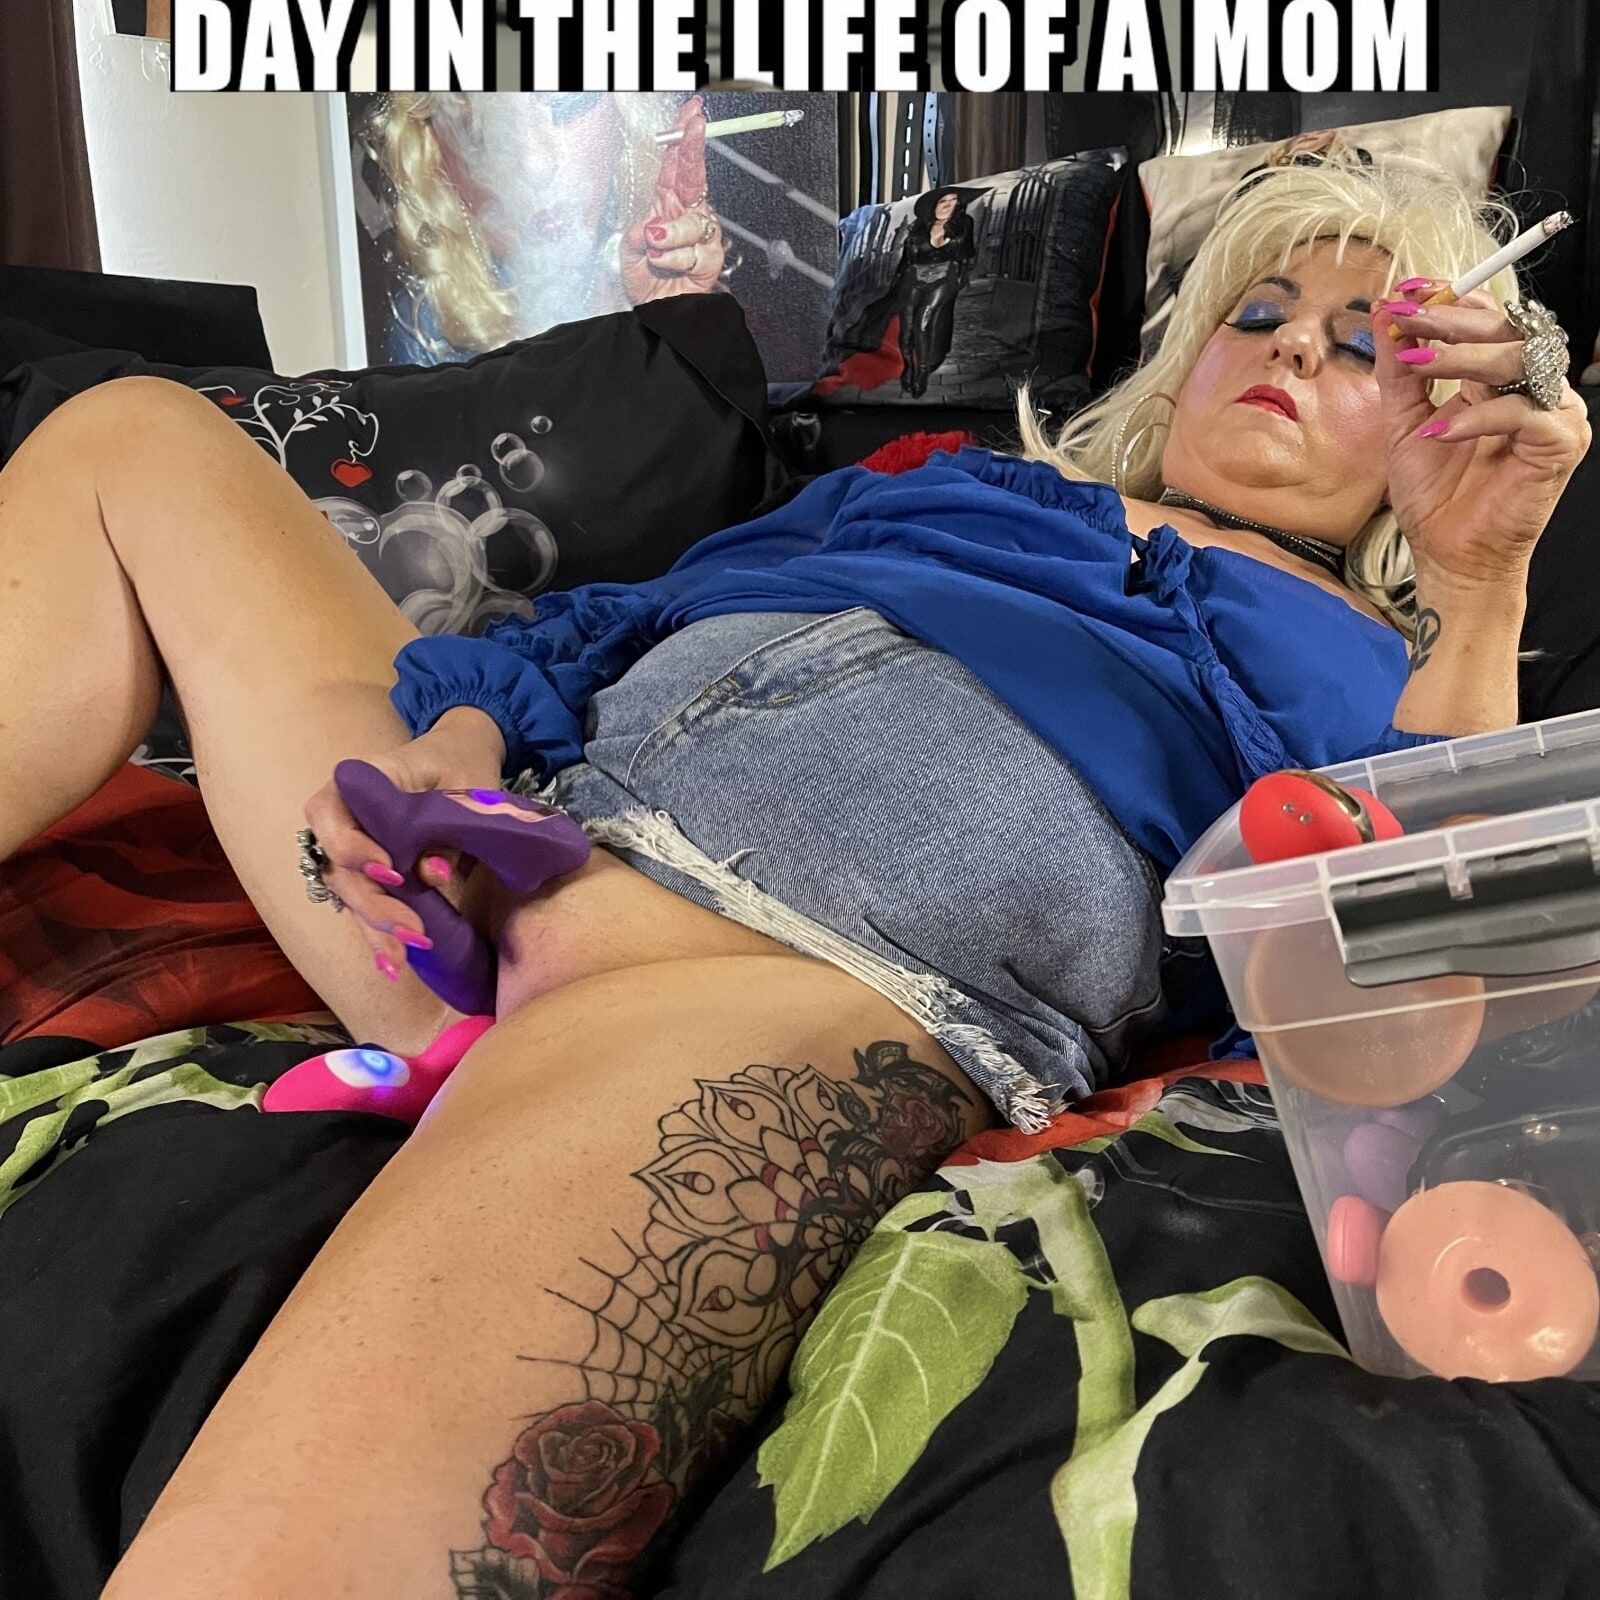 SHIRLEY THE LIFE OF A MOM #15